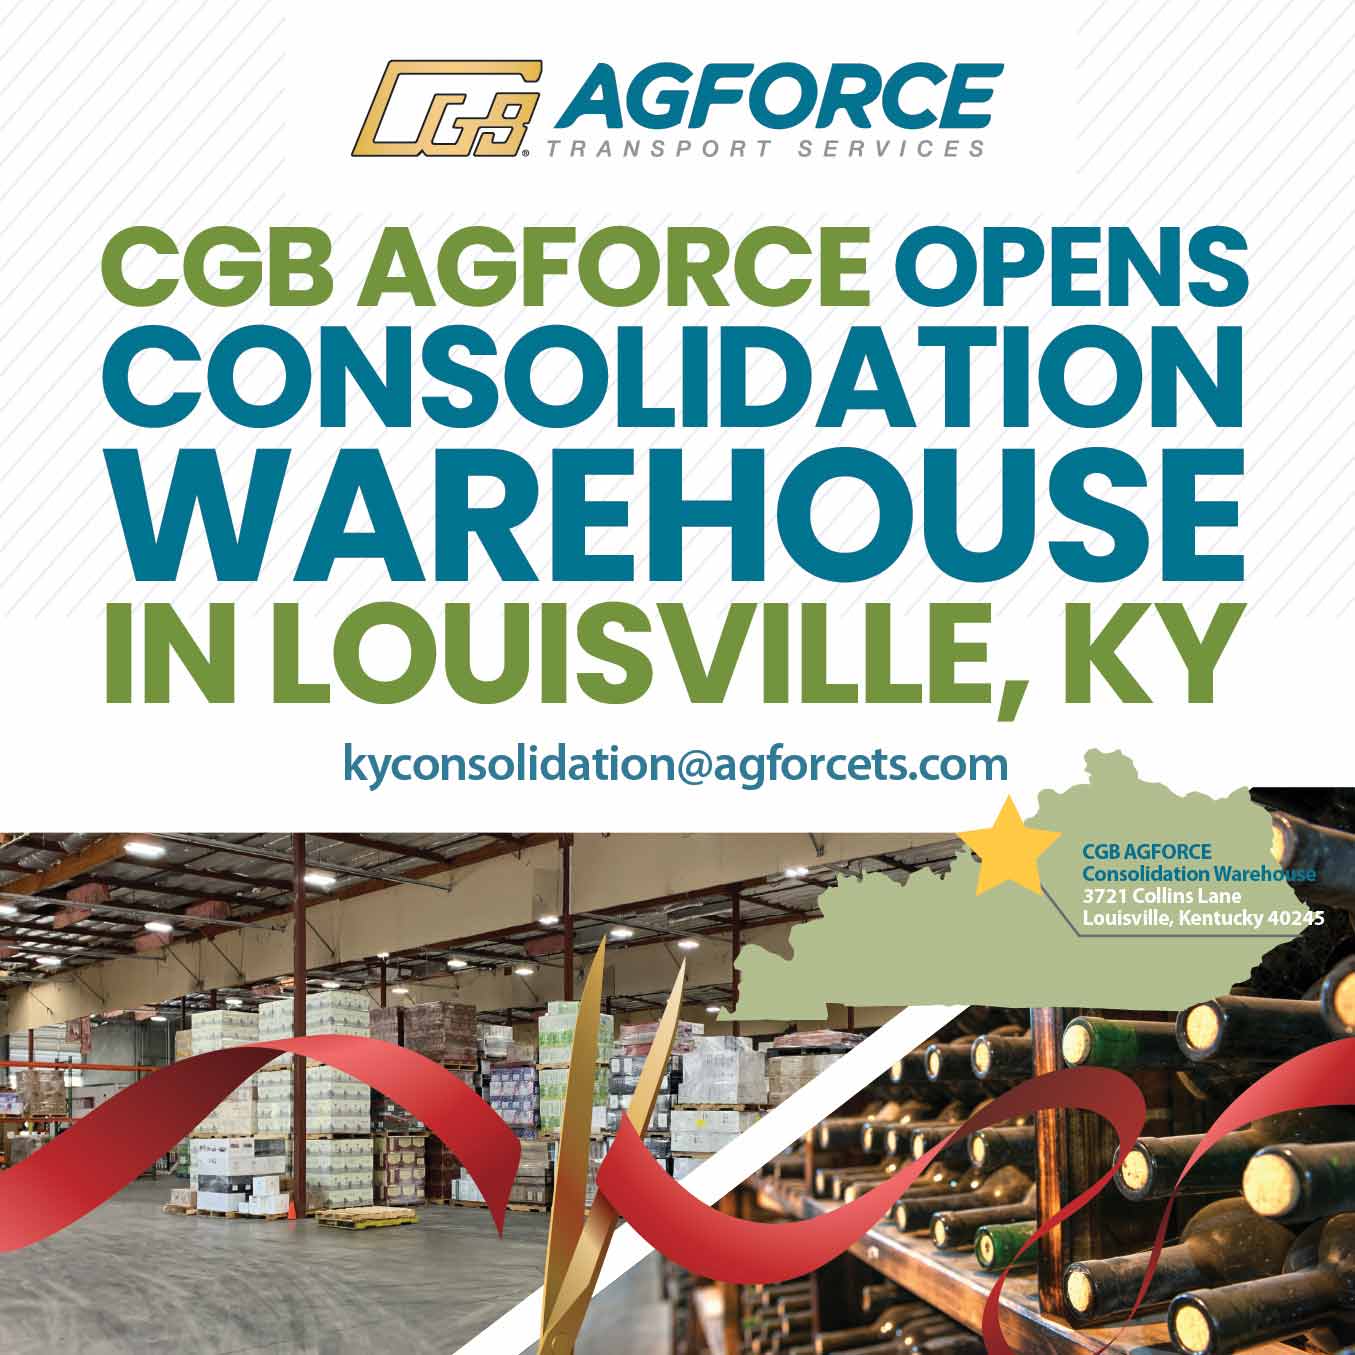 CGB Agforce Transport Services Opens First-of-Its-Kind Consolidation Warehouse in Louisville, Kentucky 